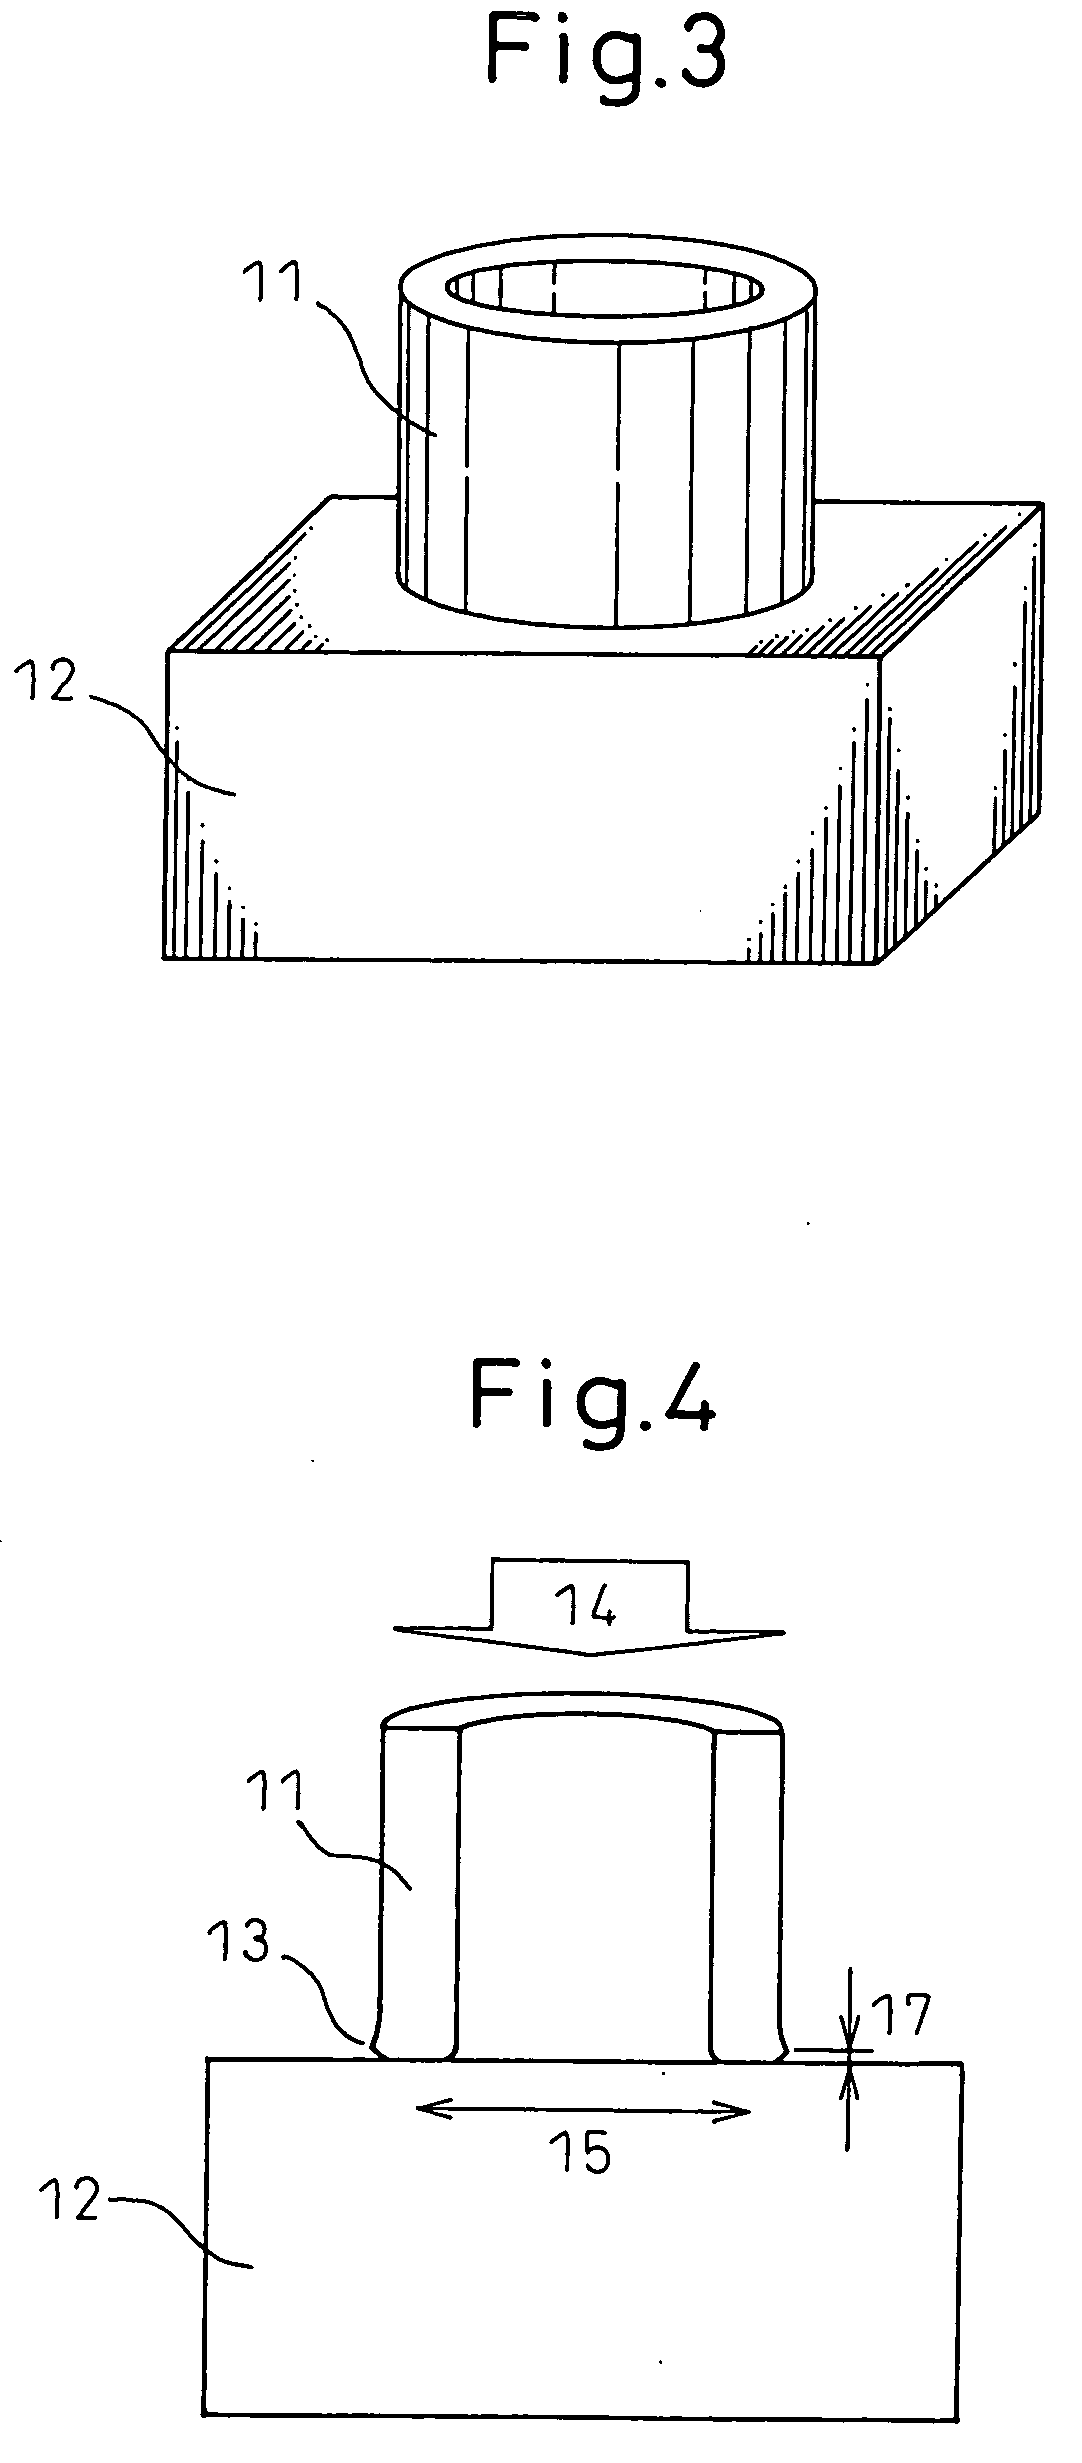 Liquid phase diffusion welding method for metallic machine part and metallic machine part